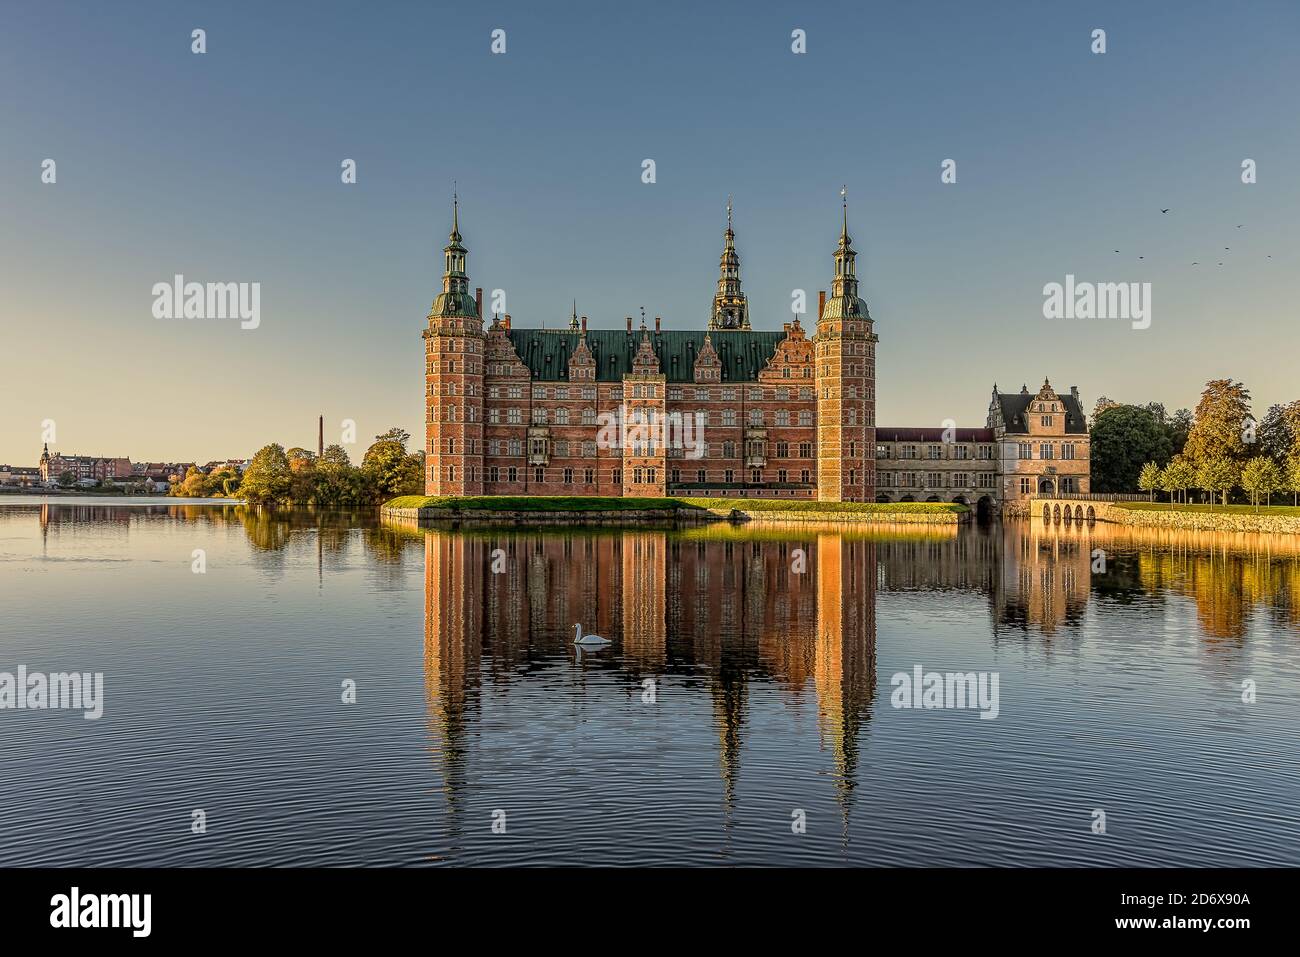 The Royal Frederiksborg castle glimmers in the sunshine and is reflected in the lake with a swimming swan, Hillerod, Denmark, October 17, 2020 Stock Photo